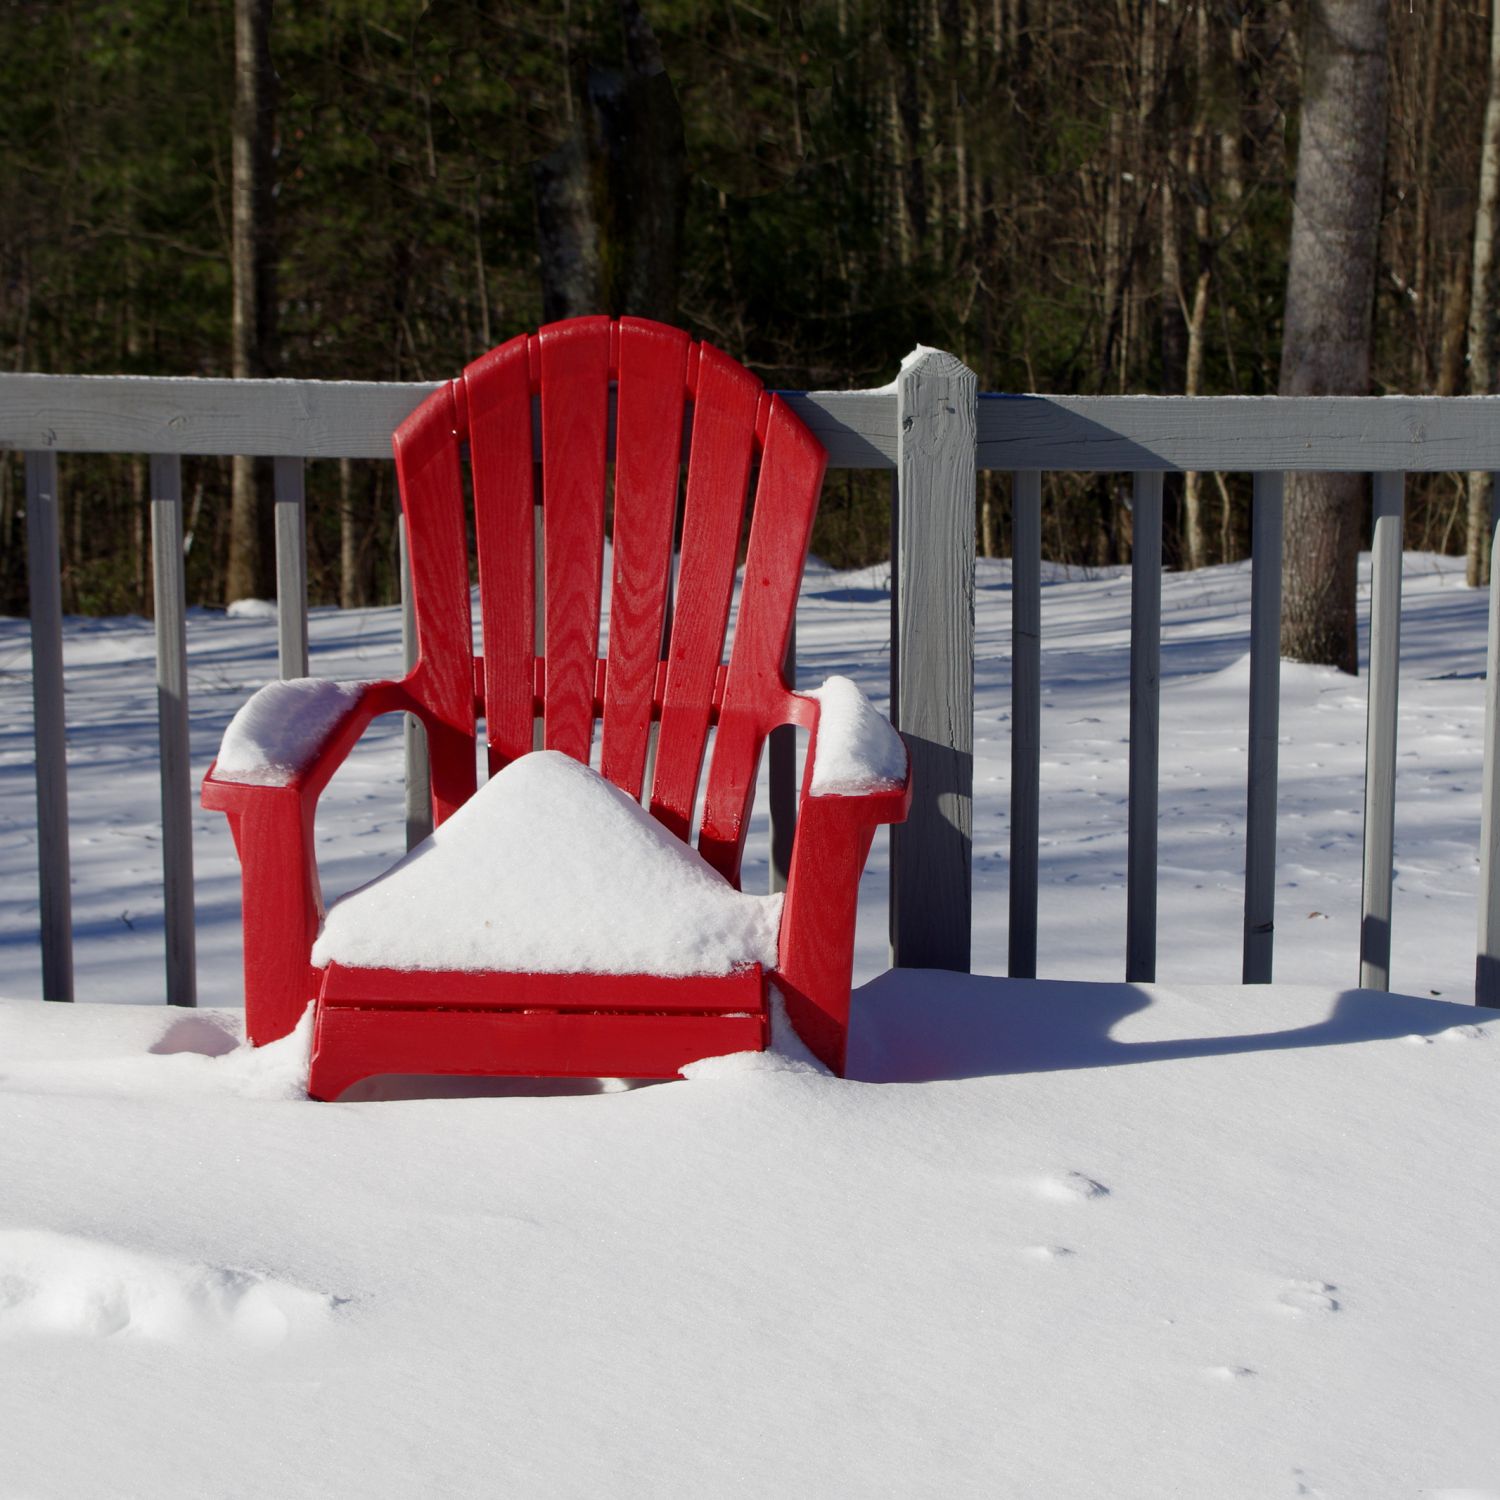 A red chair covered in snow